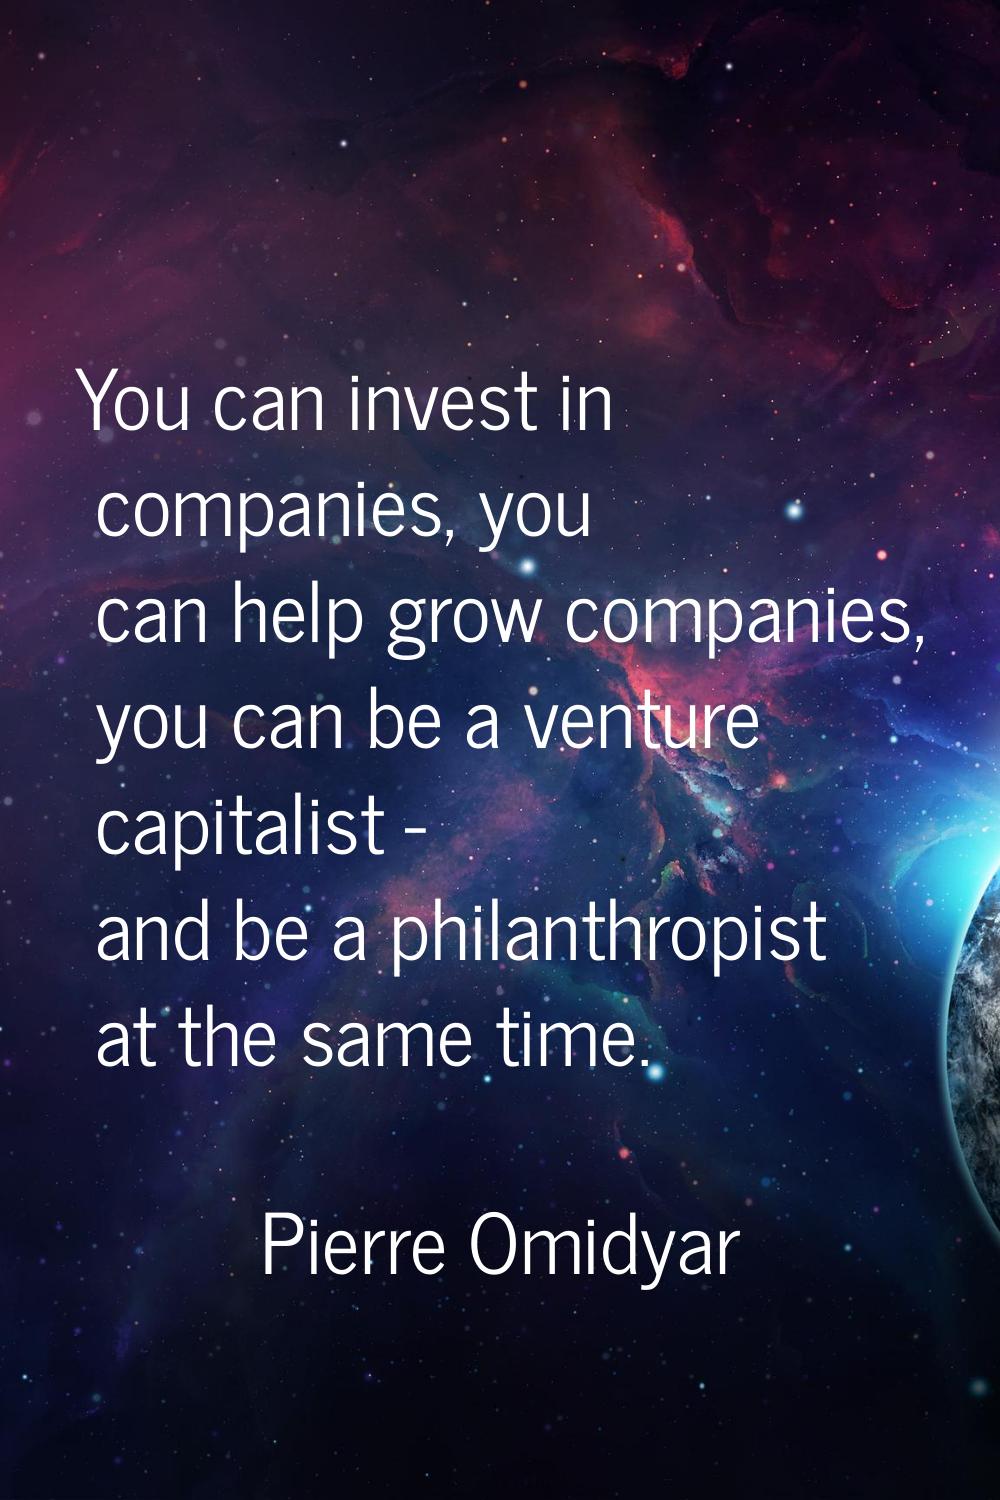 You can invest in companies, you can help grow companies, you can be a venture capitalist - and be 